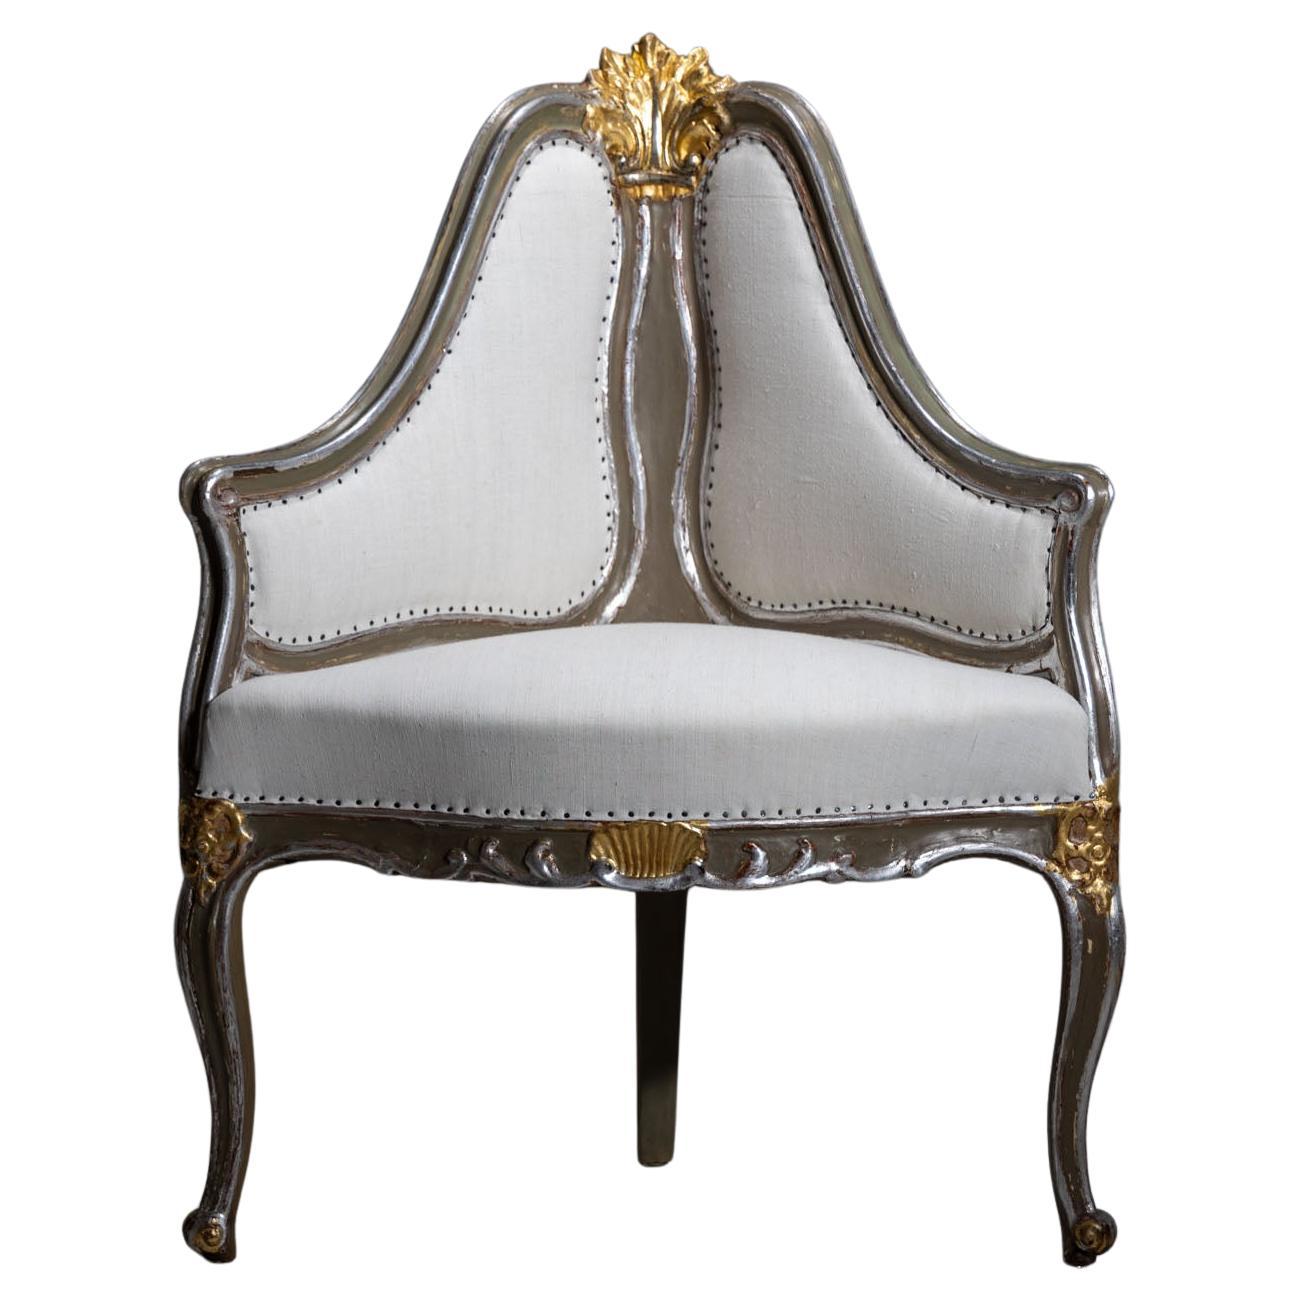 Upholstered Corner armchair in baroque style, 19th century